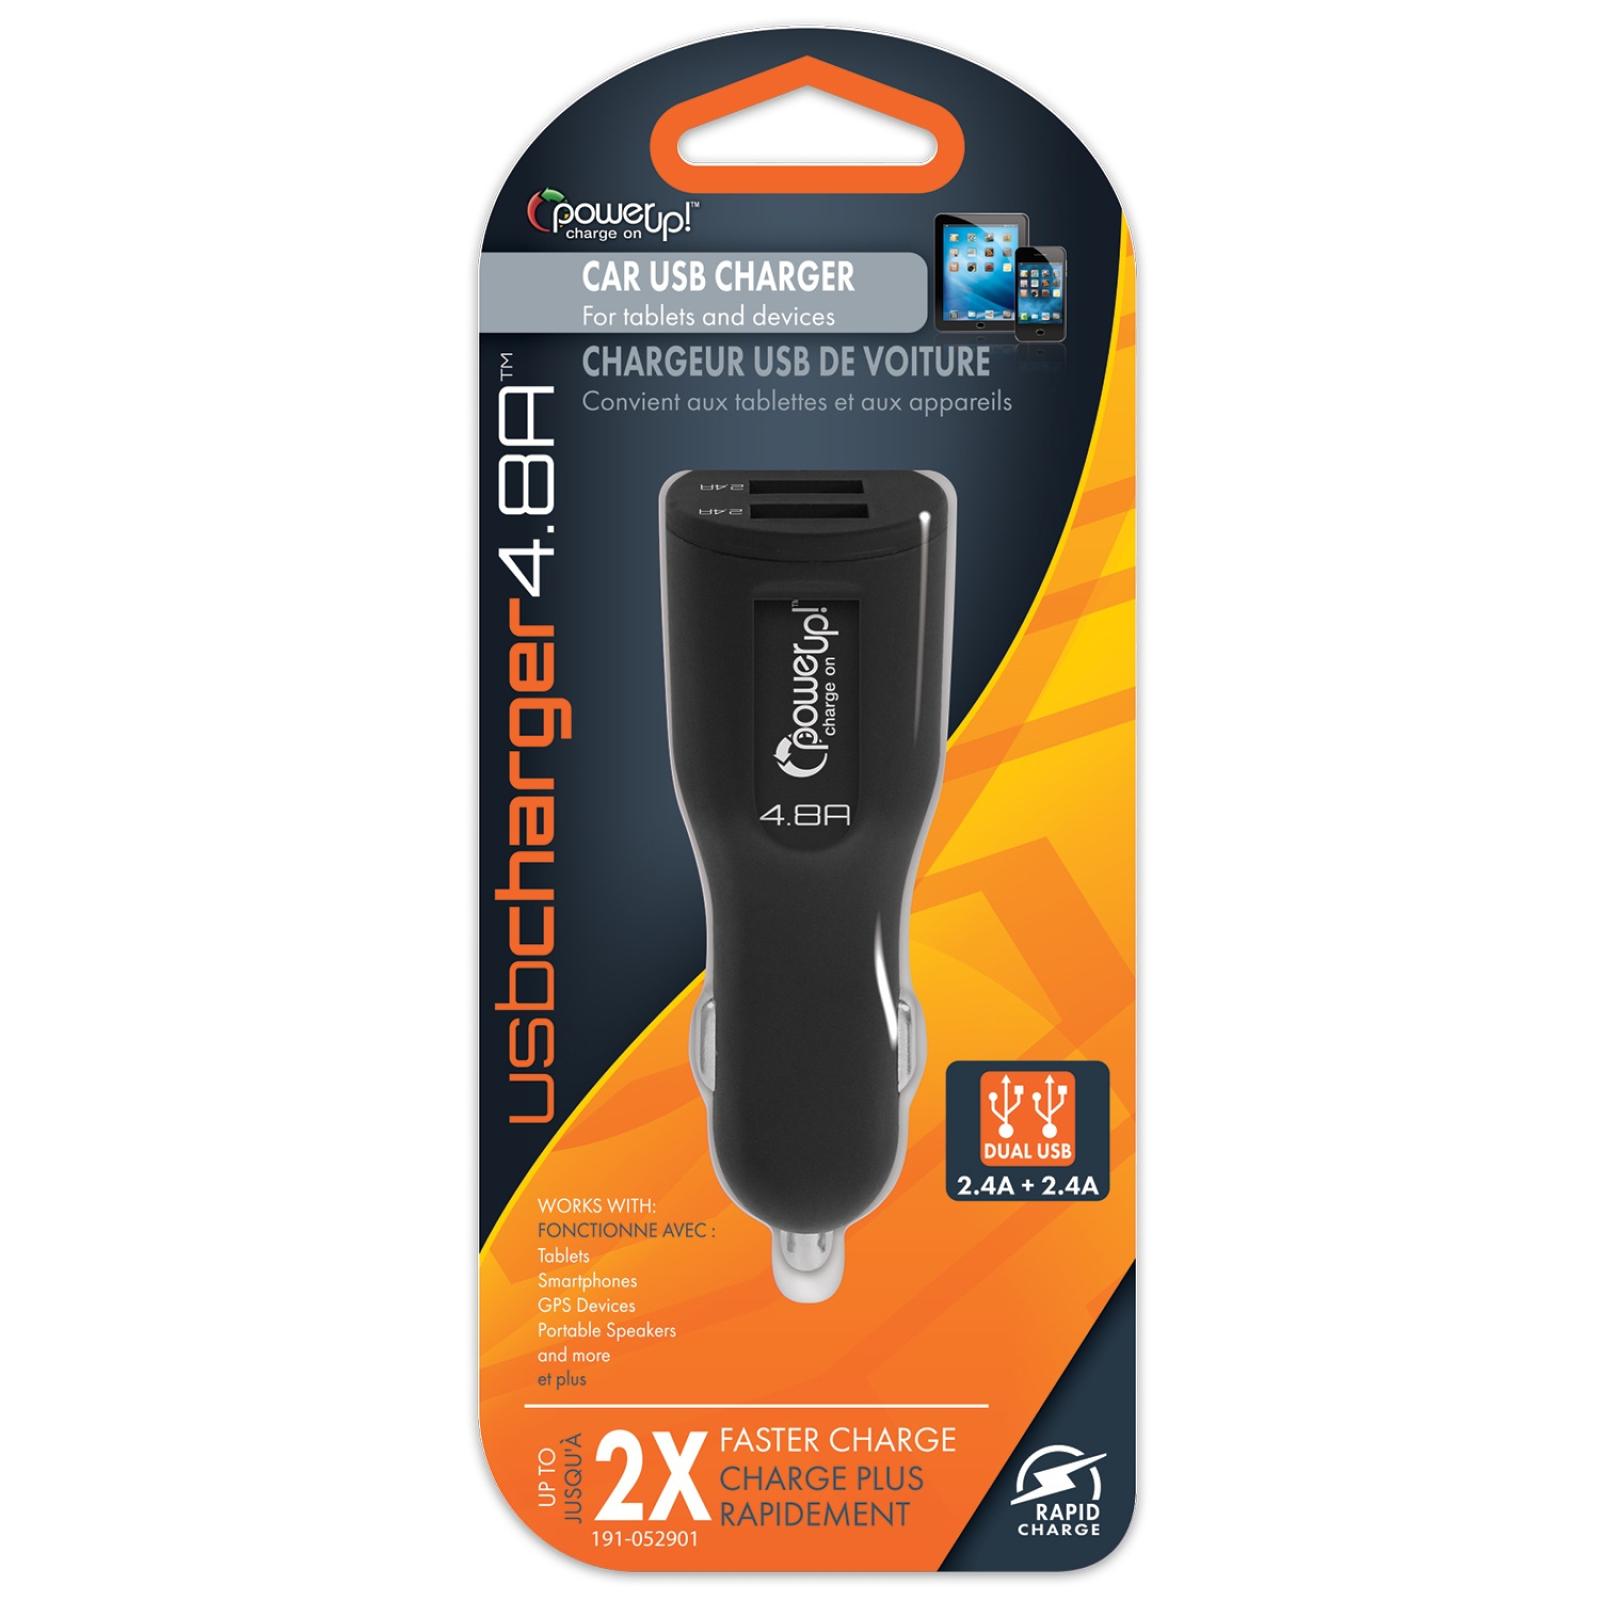 PowerUp! Charge On™ 4.8A USB Car Charger